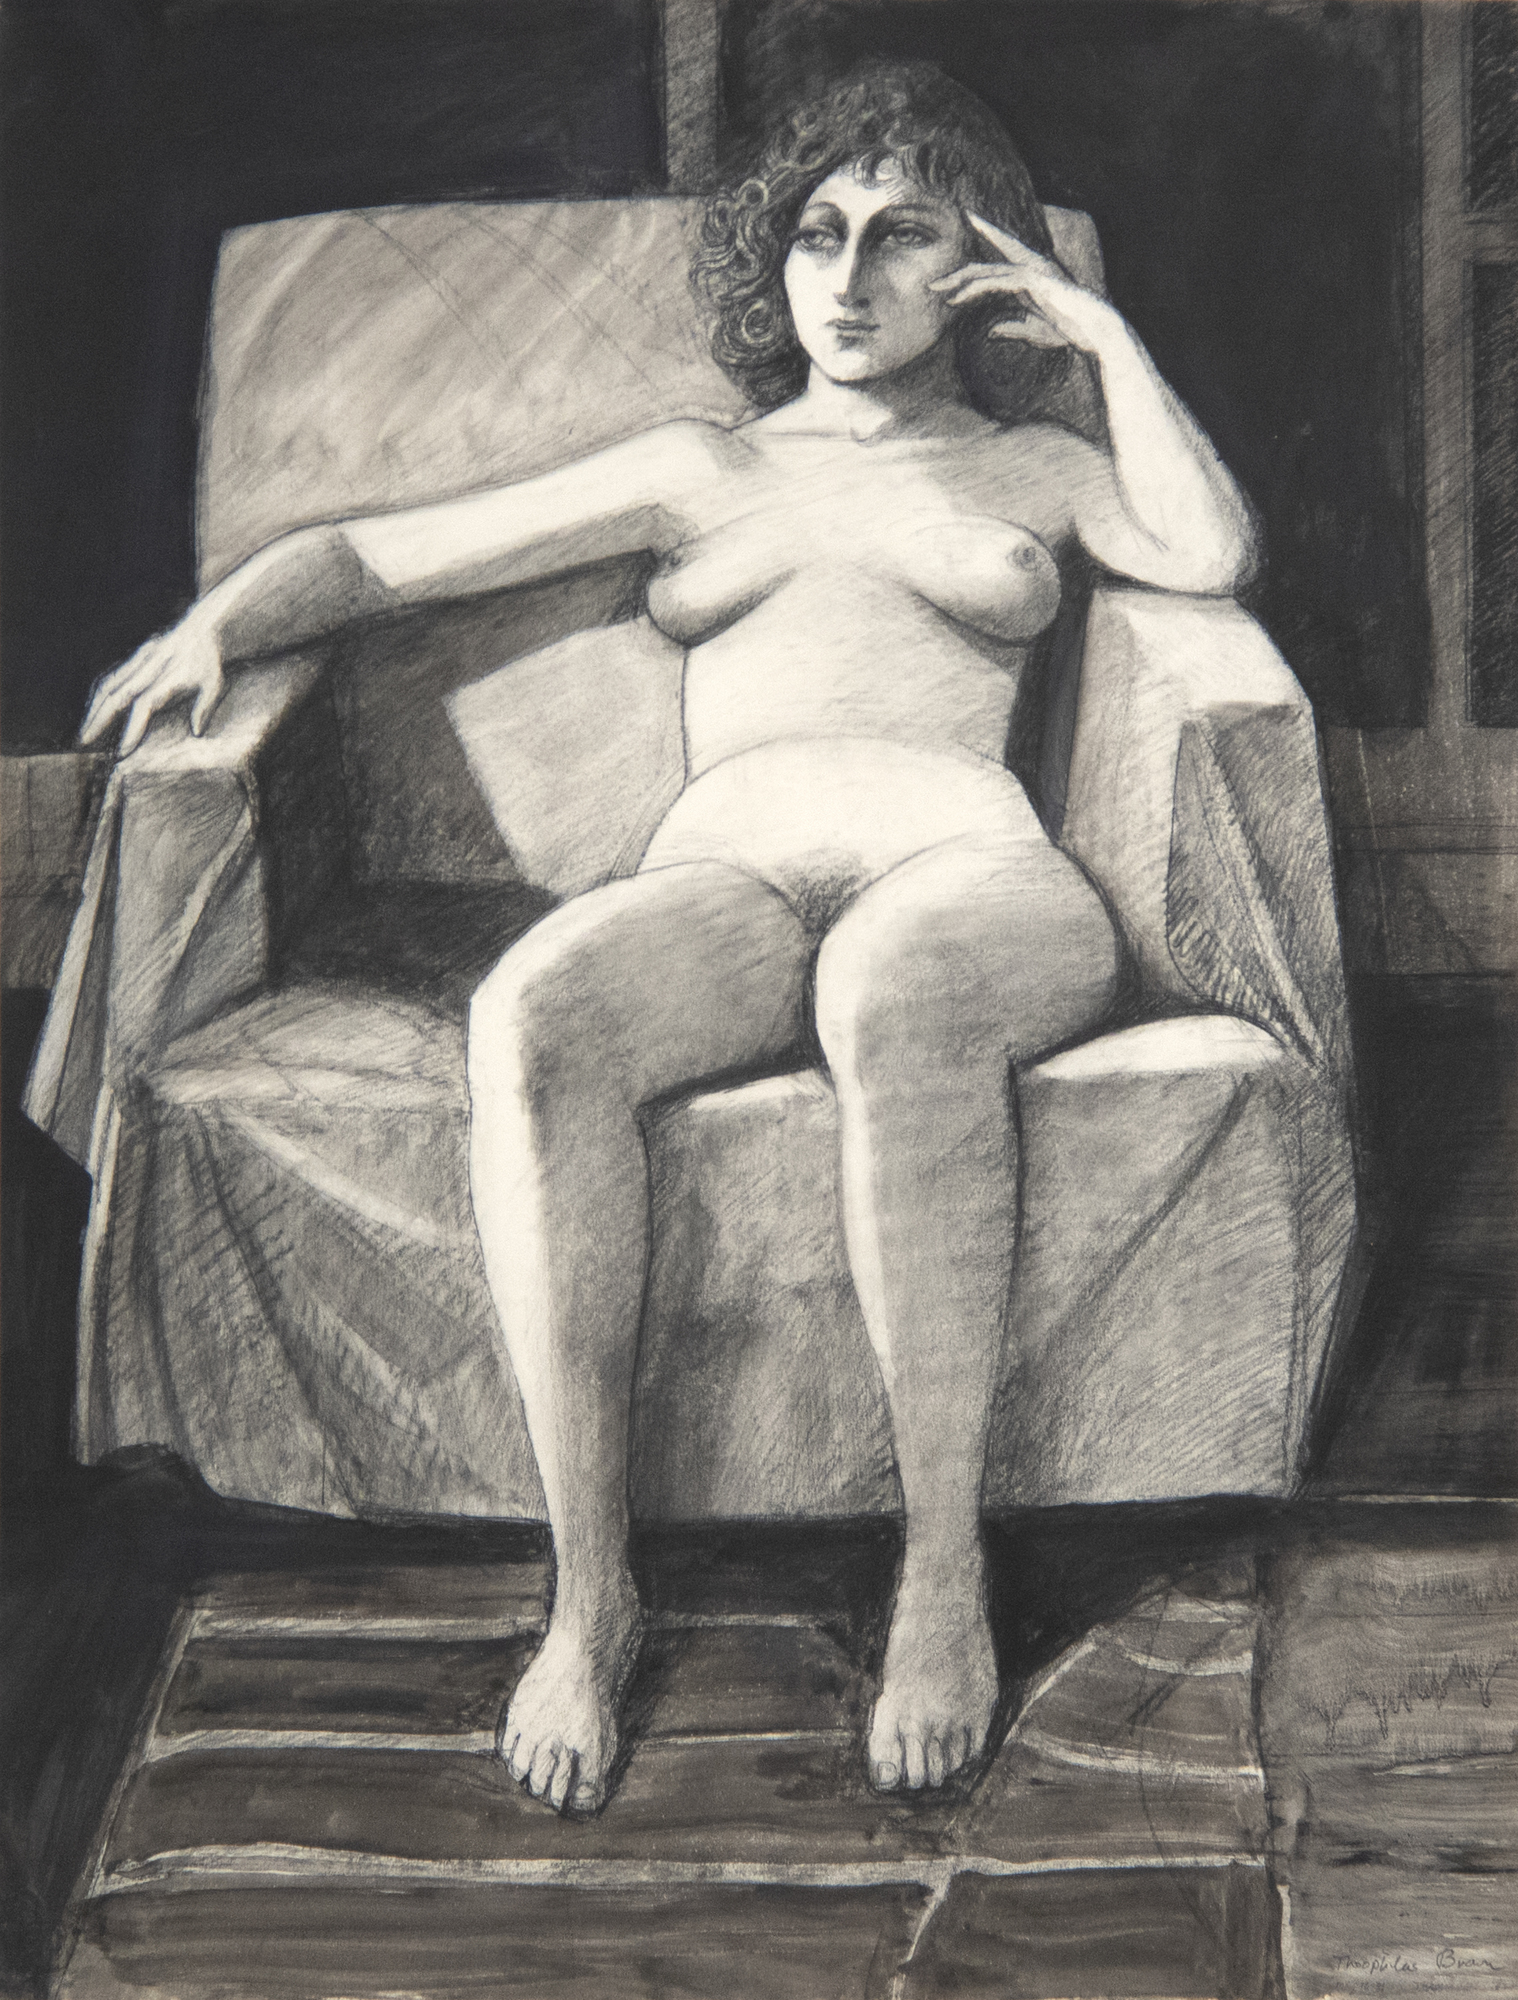 WILLIAM THEOPHILUS BROWN - Untitled (Seated Female Nude) - charcoal, pencil and wash on paper - 25 1/2 x 19 1/2 in.